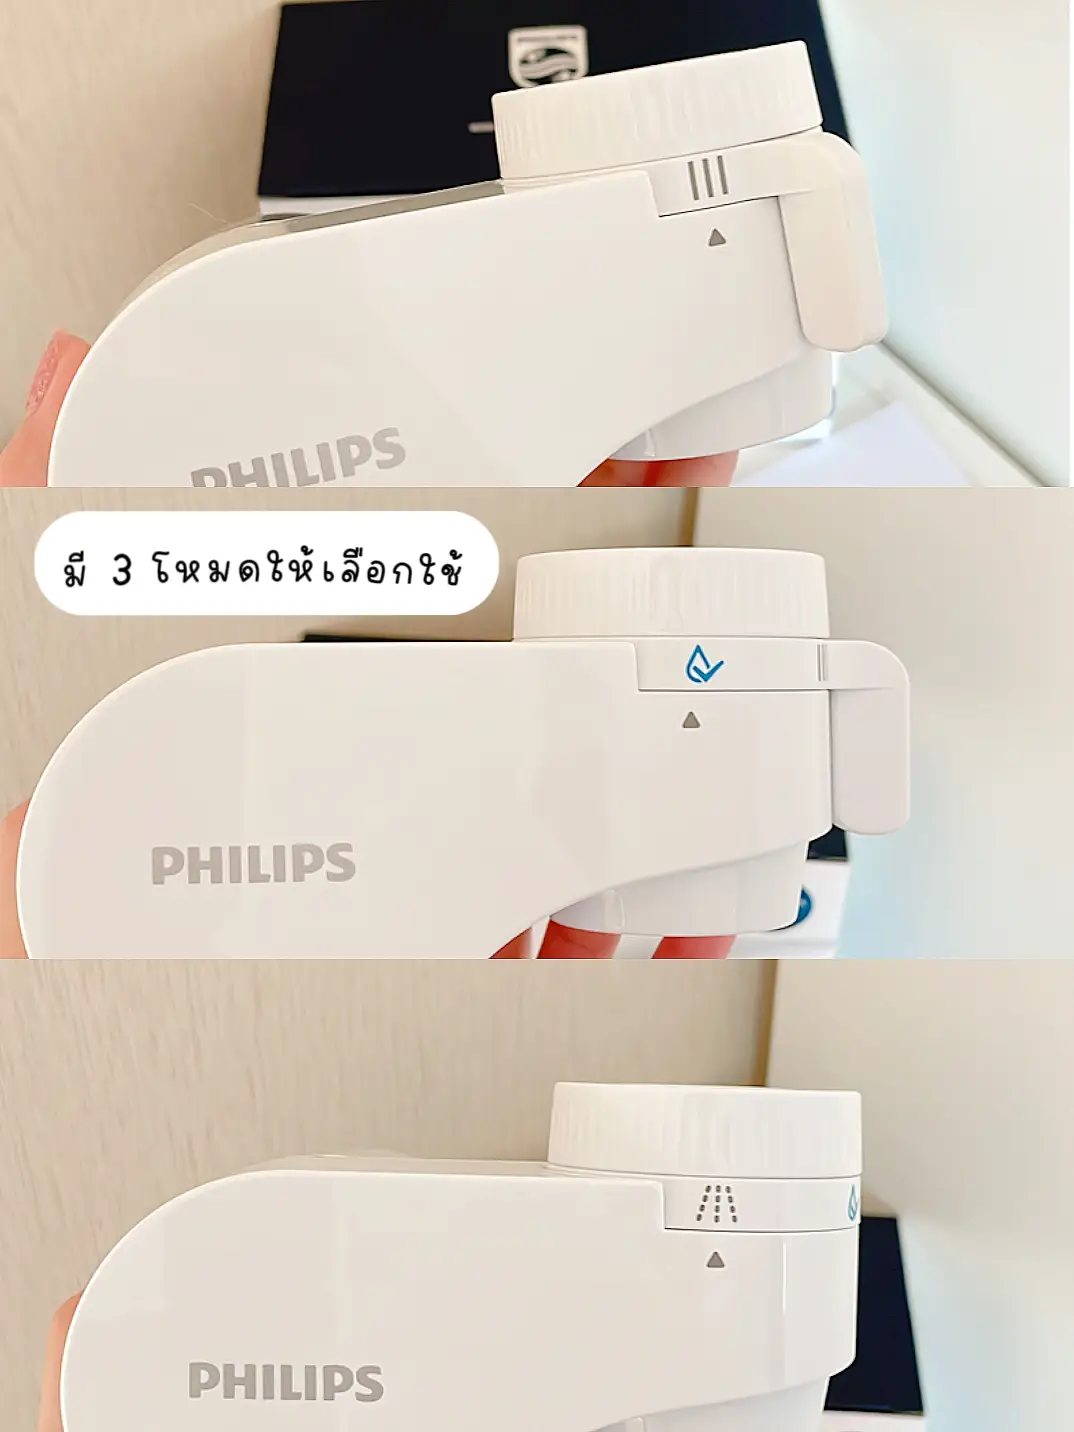 Philips Water Filter Faucet Head -: 🛁 i-tem That Every Home